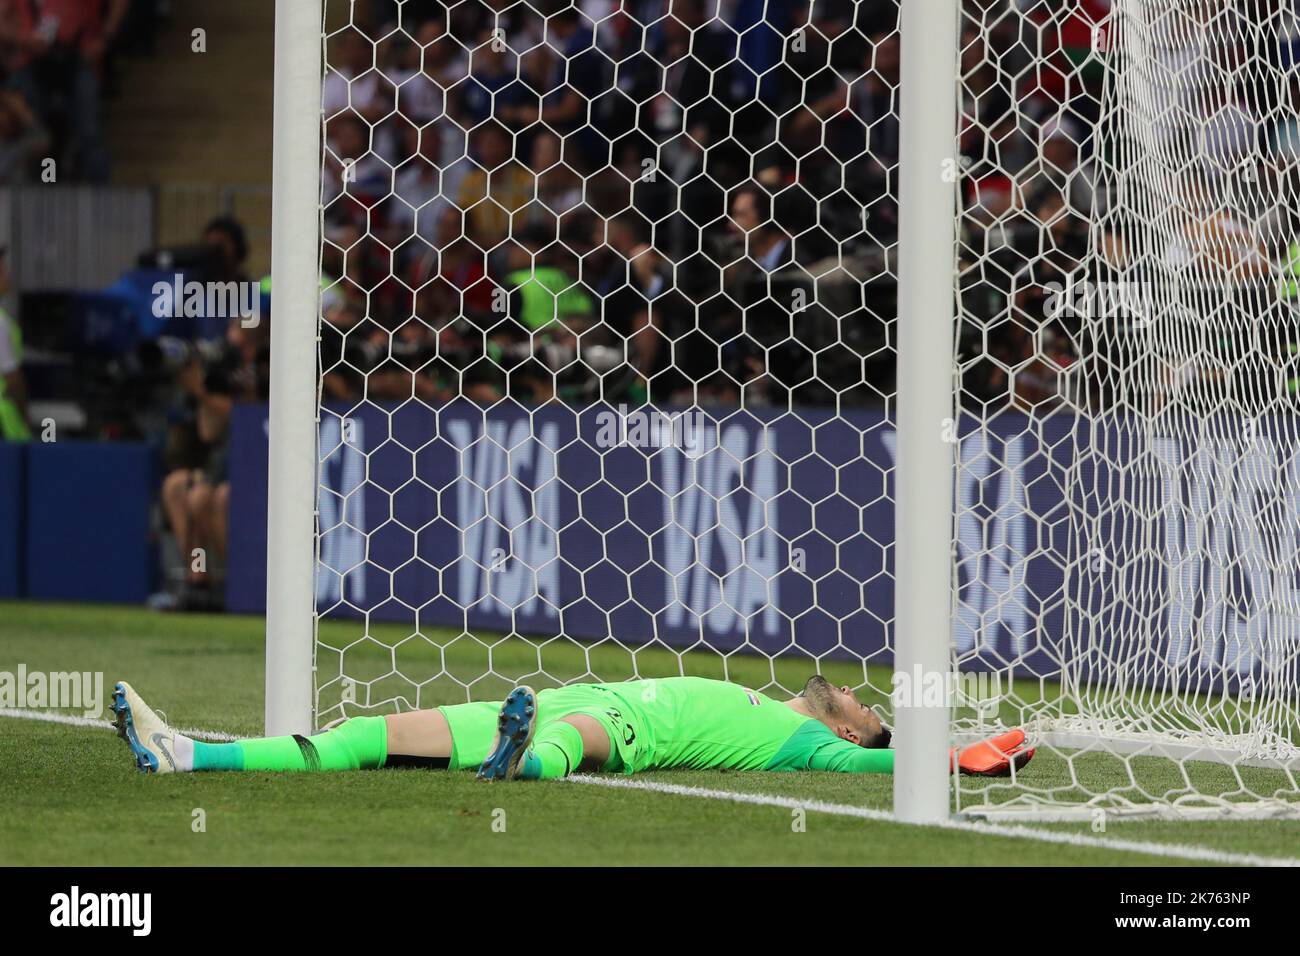 FIFA World Cup Russia 2018, Final Football Match France versus Croatia, France is the new World Champion. France won the World Cup for the second time 4-2 against Croatia. Pictured: CRO23 GK Danijel Subasic © Pierre Teyssot / Maxppp Stock Photo